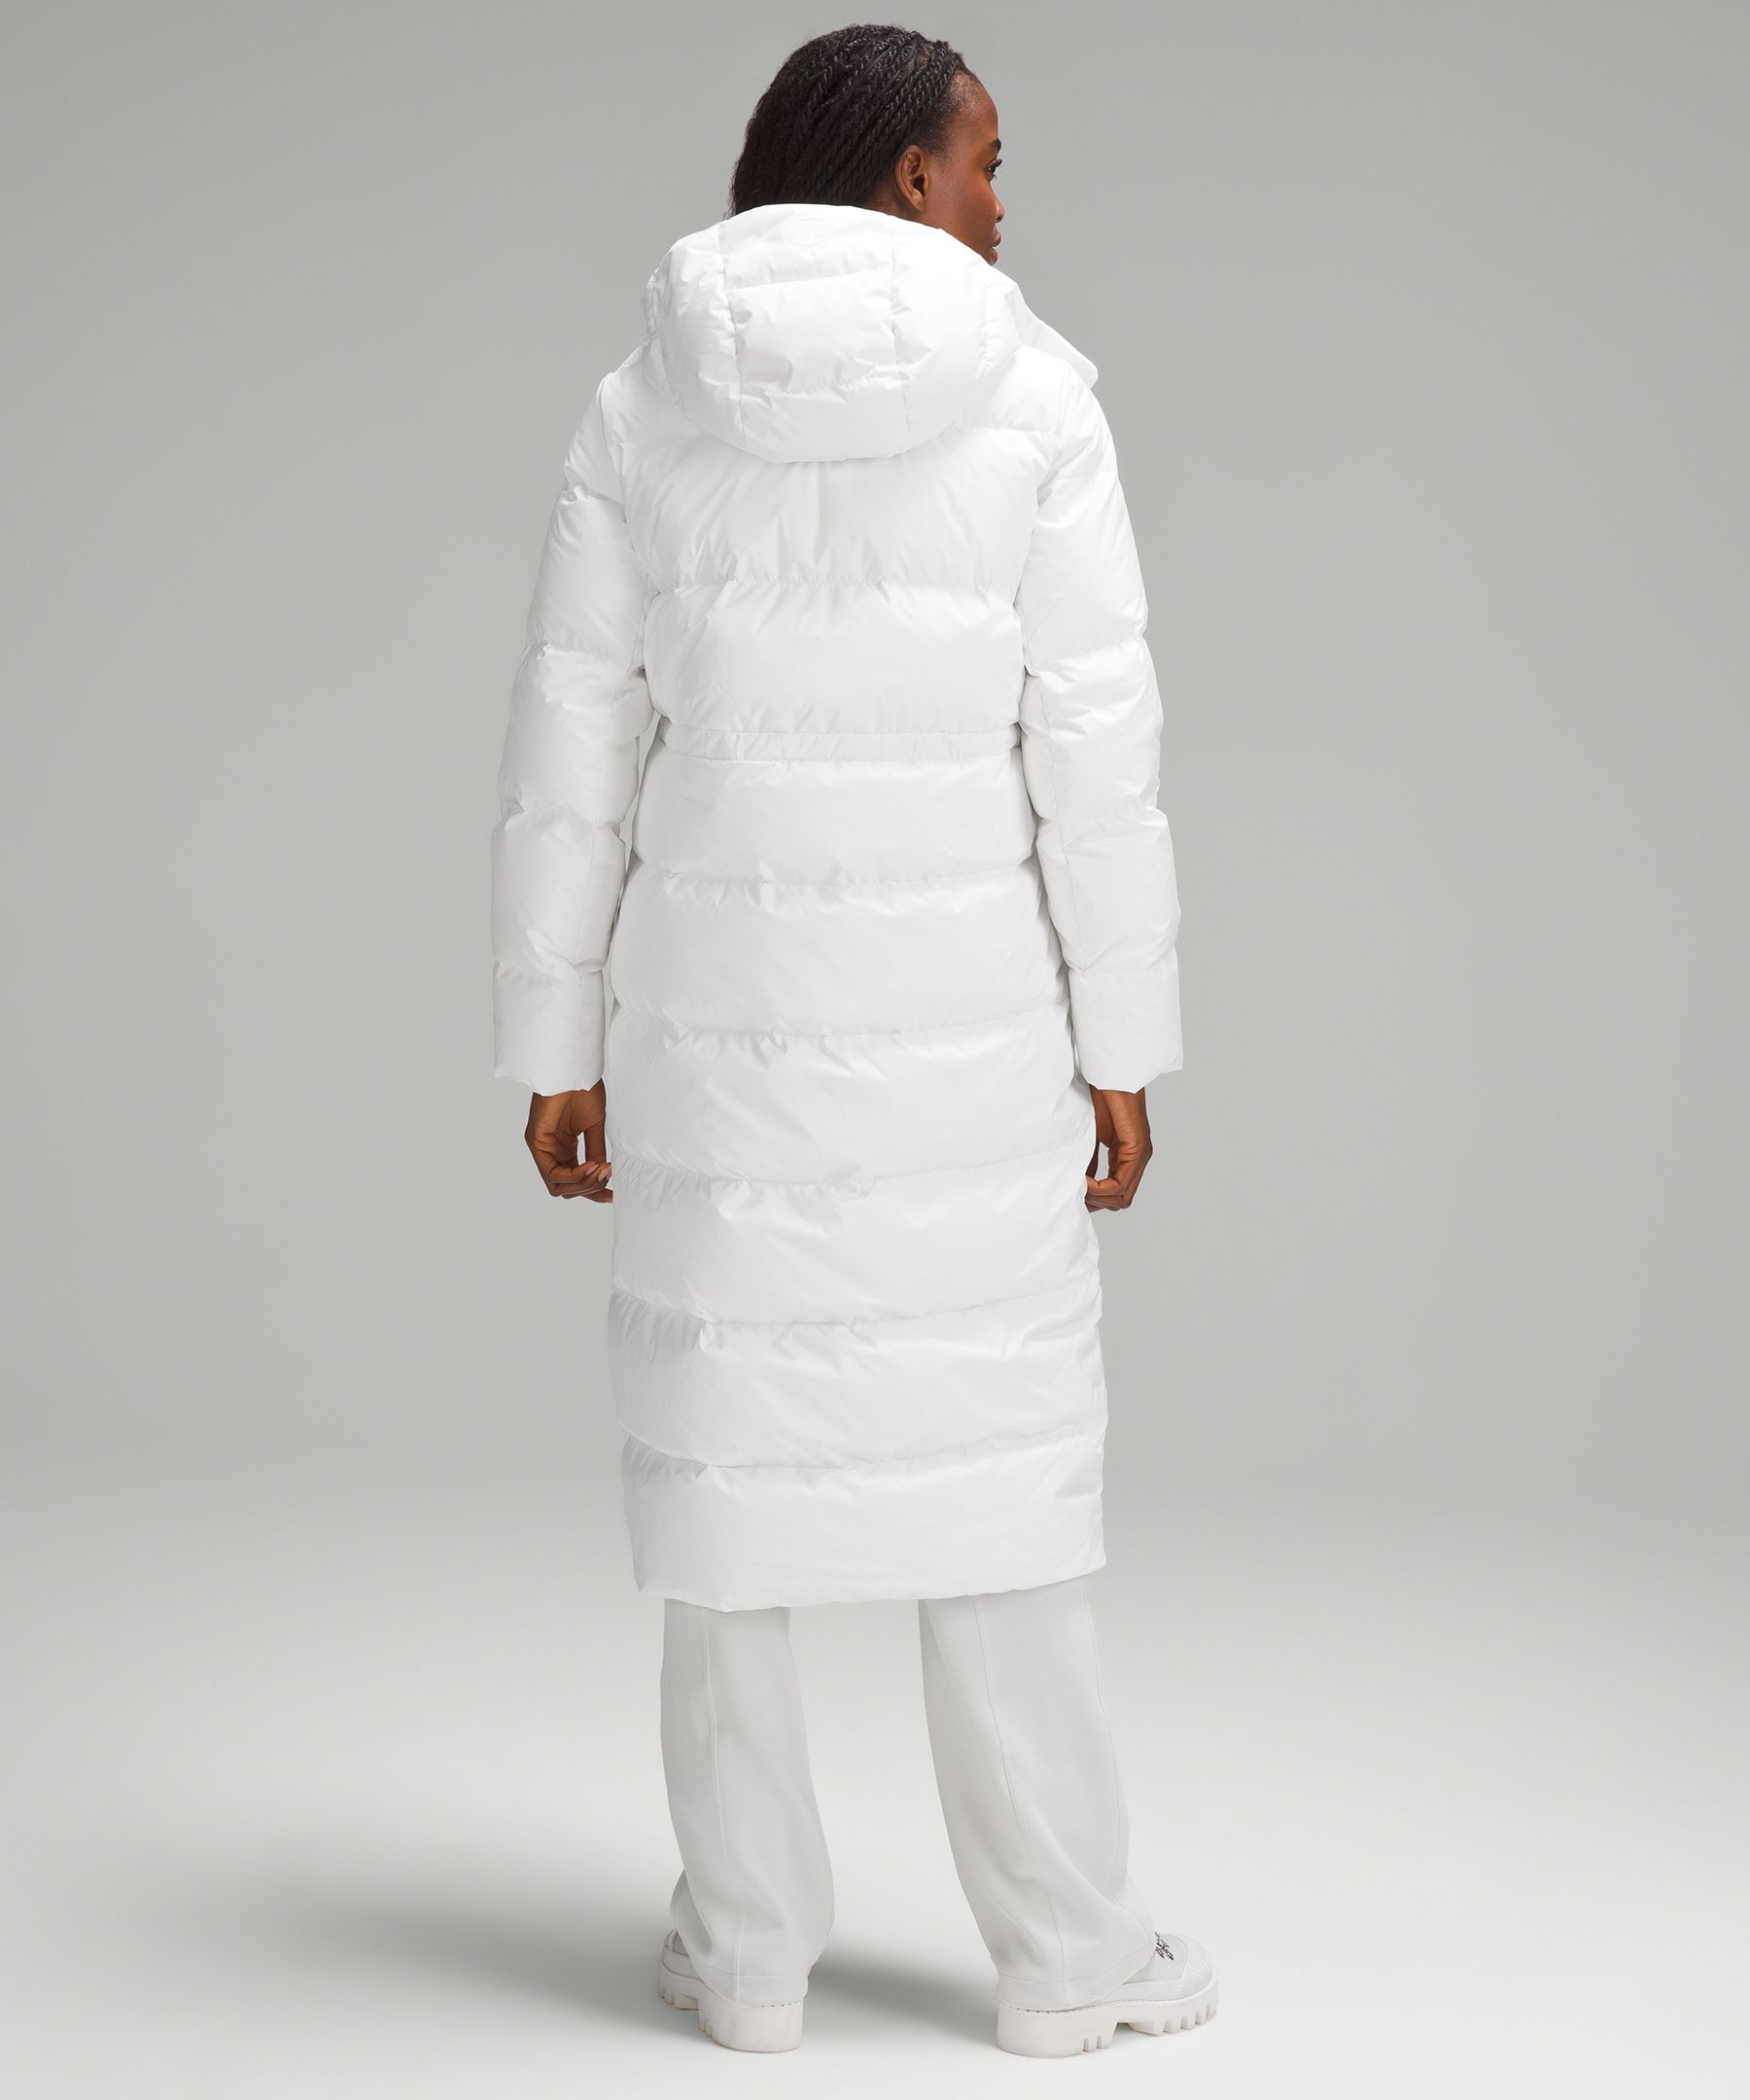 lululemon athletica Removable Sleeves Puffer Coats & Jackets for Women